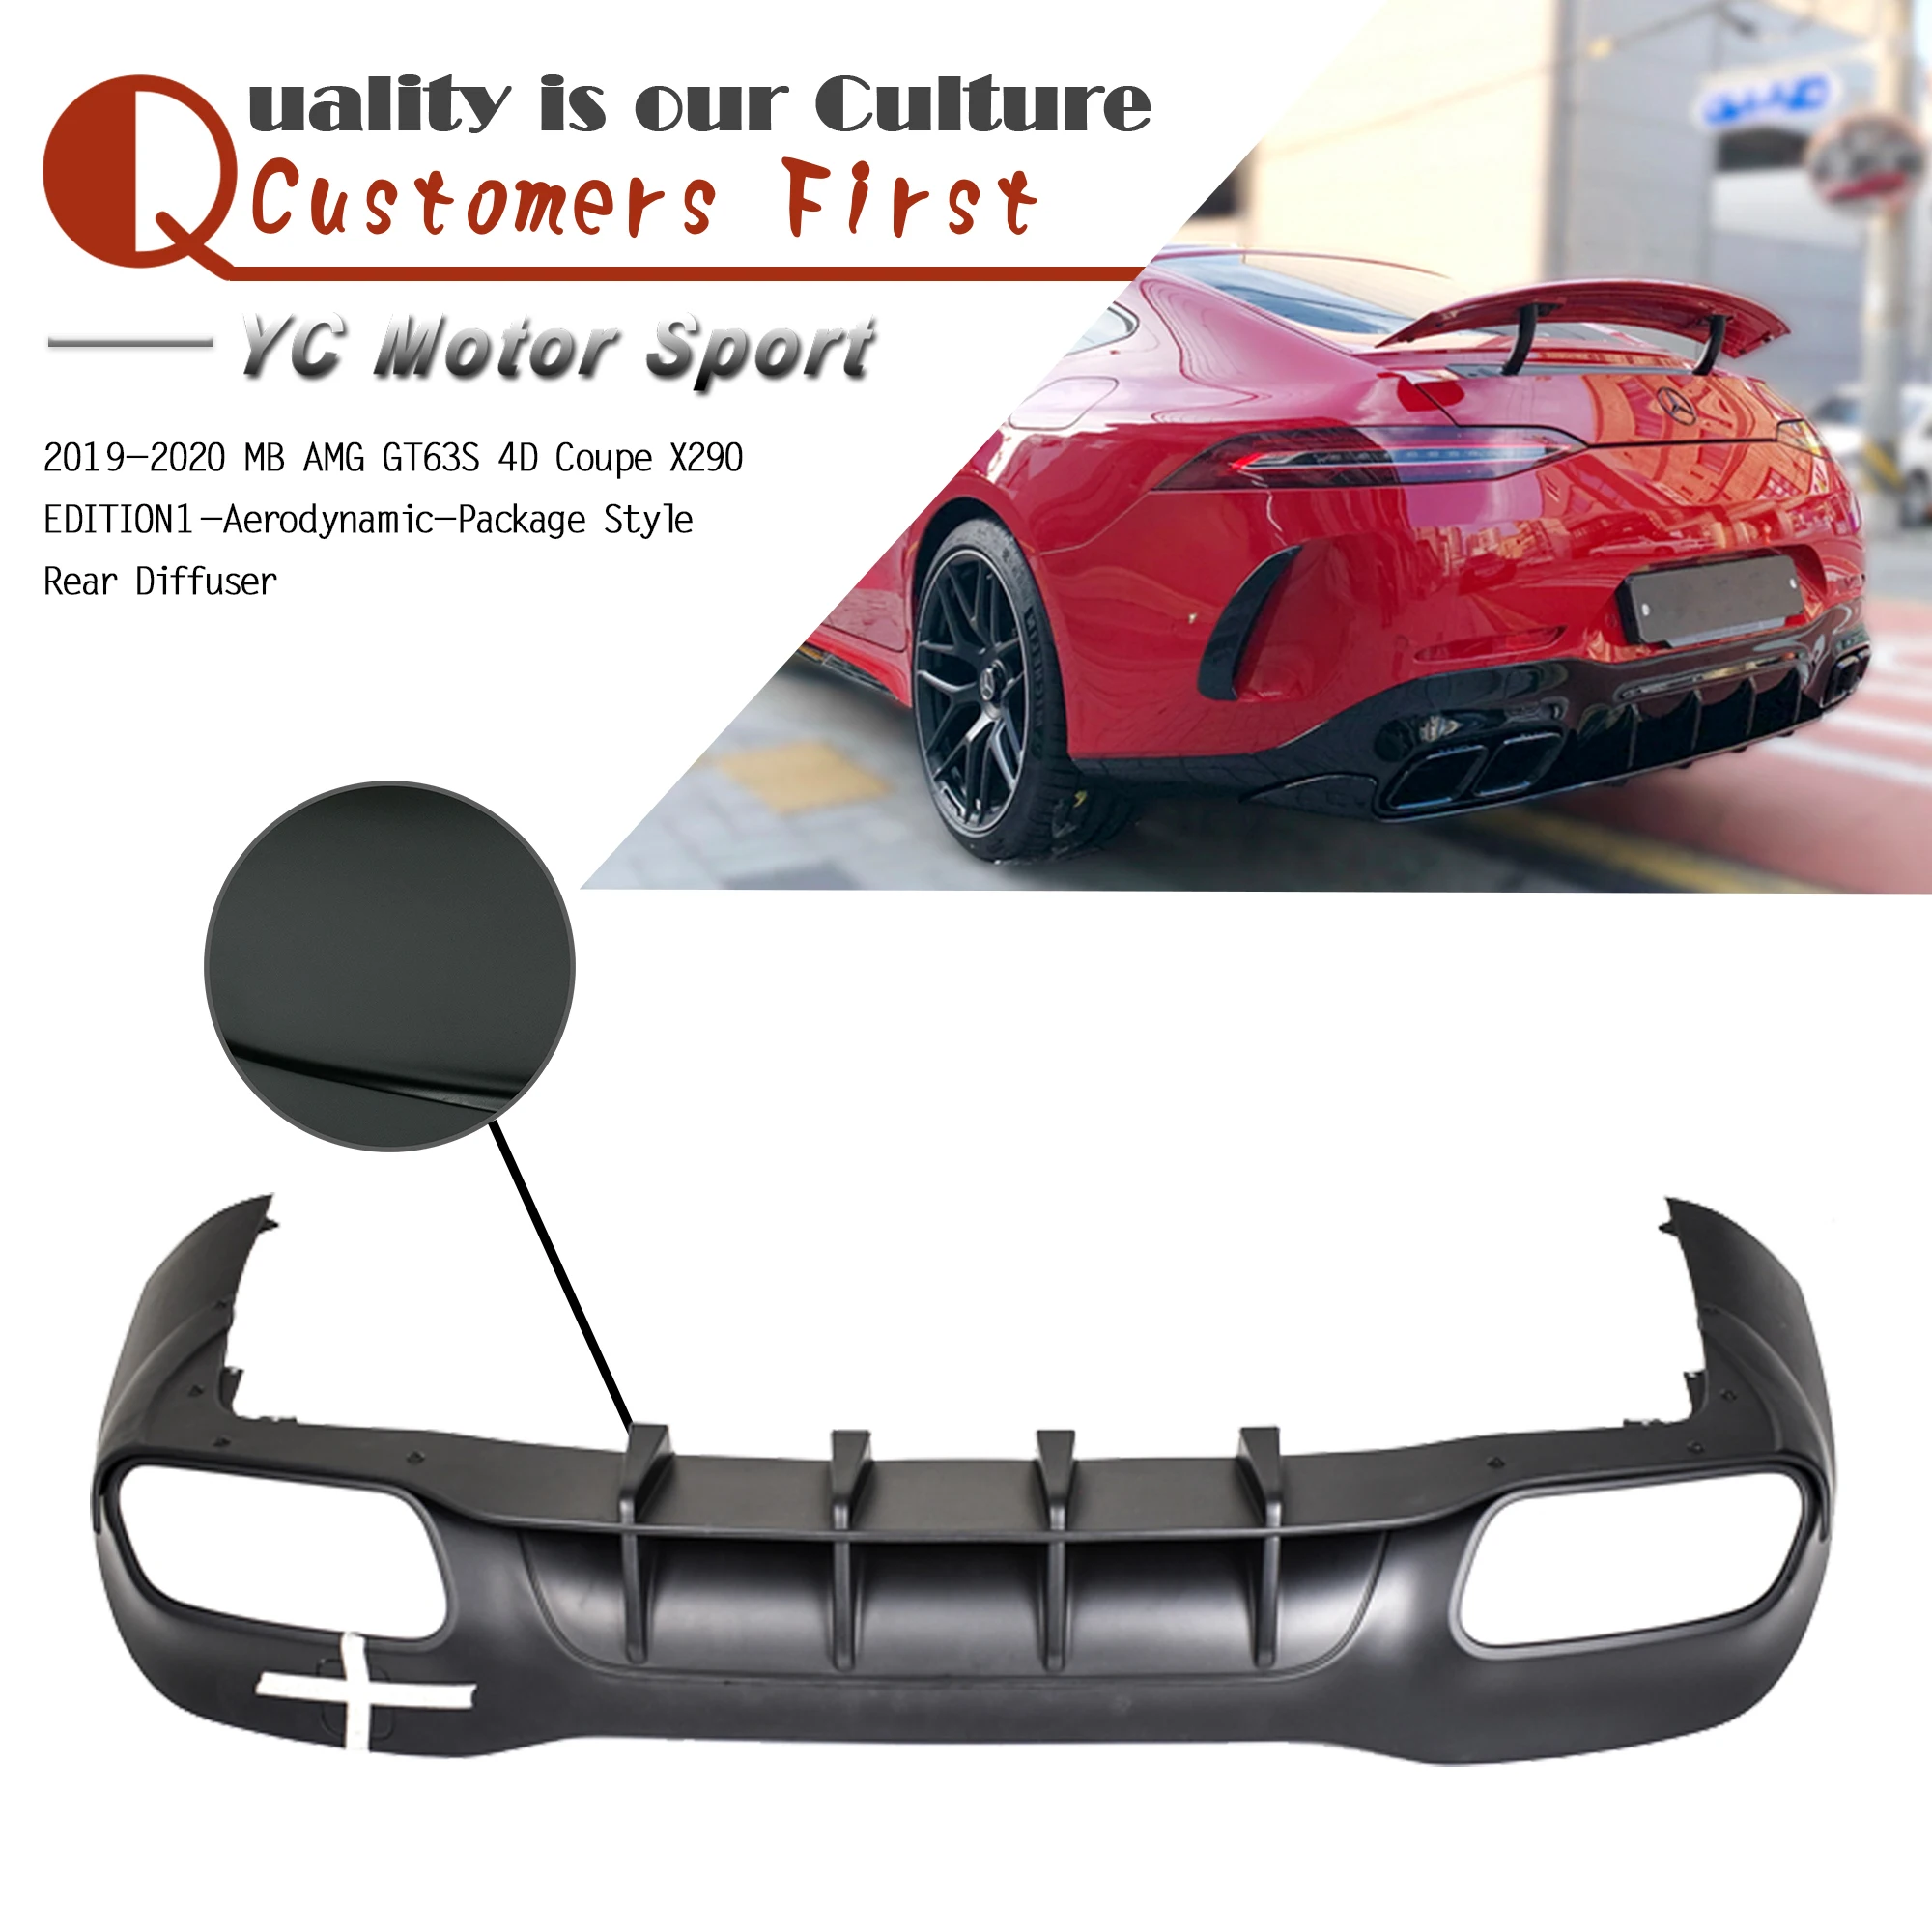 

Car Accessories Carbon Fiber Glass EDITION1-Aerodynamic-Package Style Rear Diffuser Fit For 19-20 MB AMG GT63S 4D Coupe X290 lip